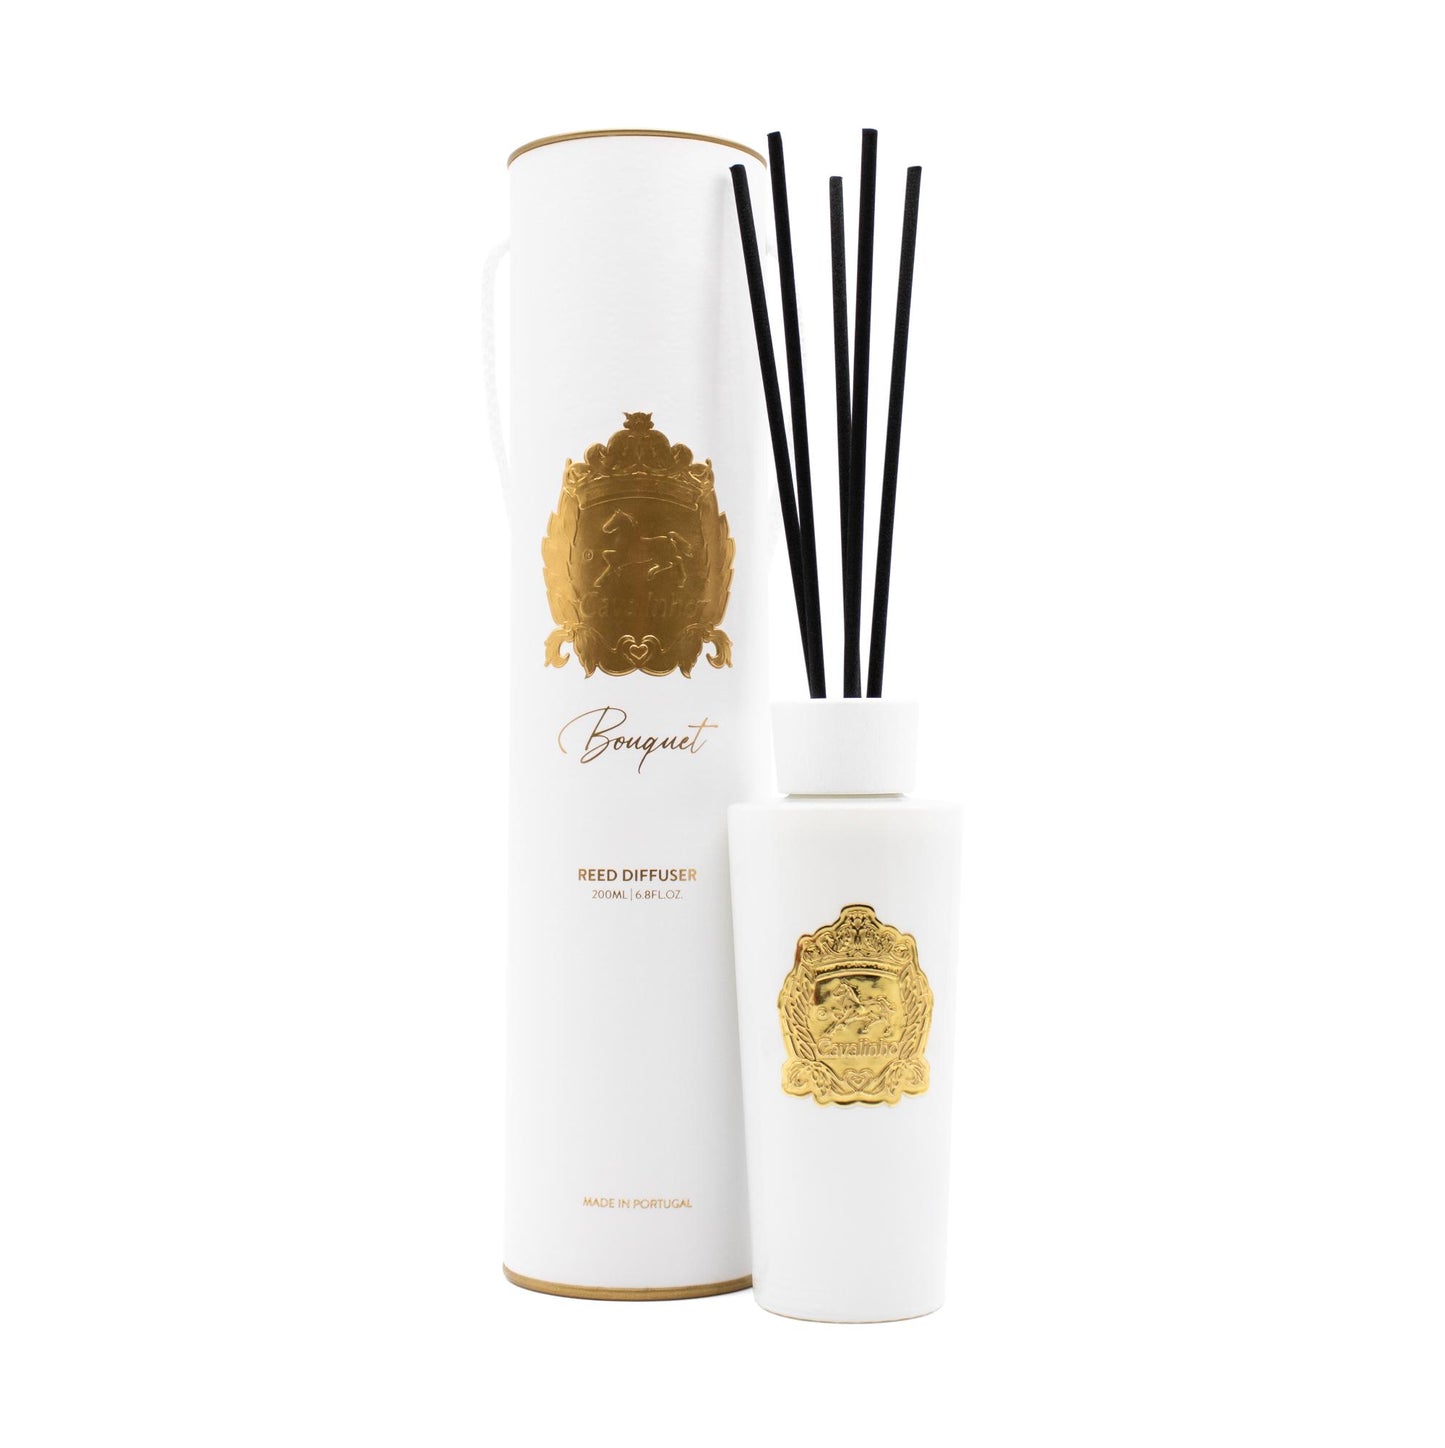 Cavalinho Bouquet Reed Diffuser Home Fragrance - 200ml - 38010005.06.20_2